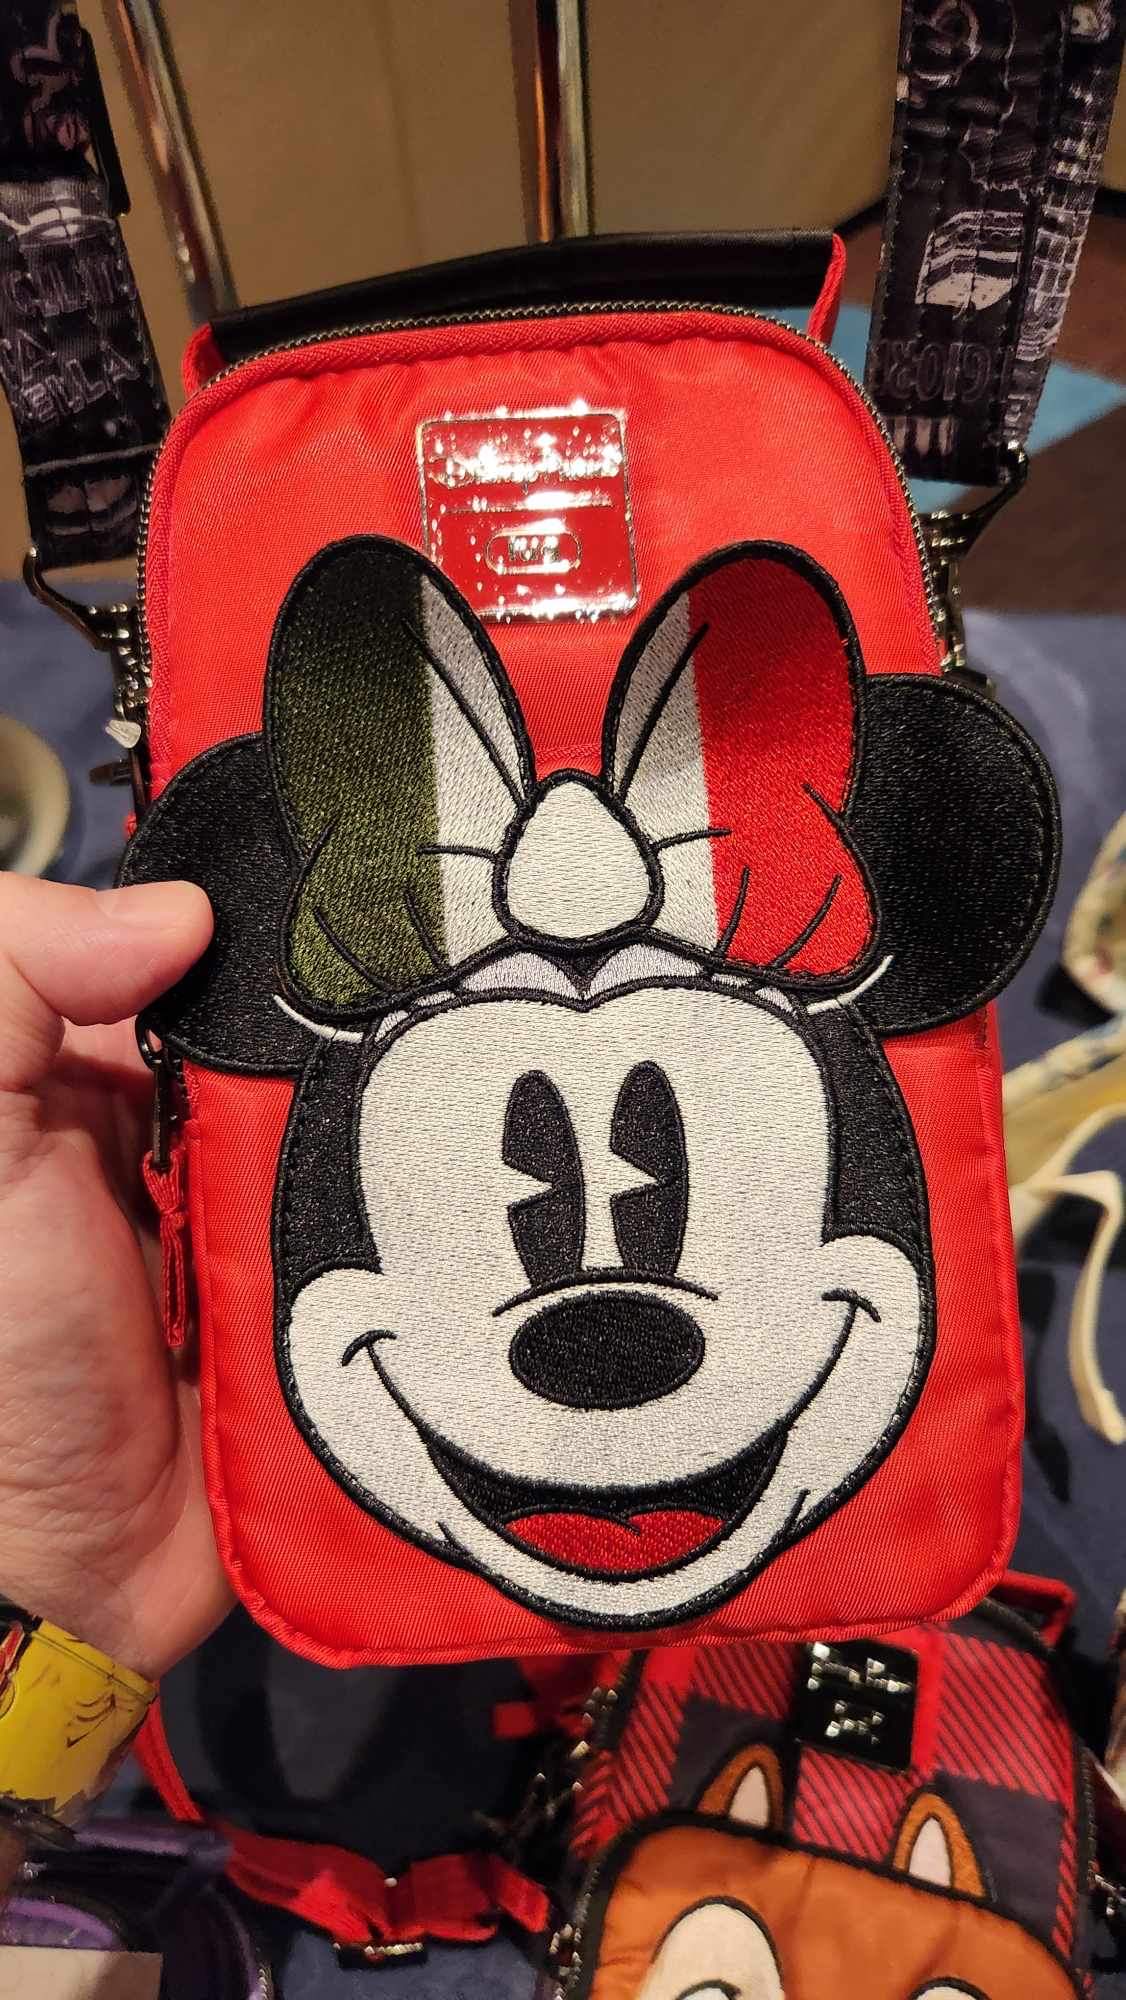 New Lug Disney Bags At Destination D23! | Chip and Company